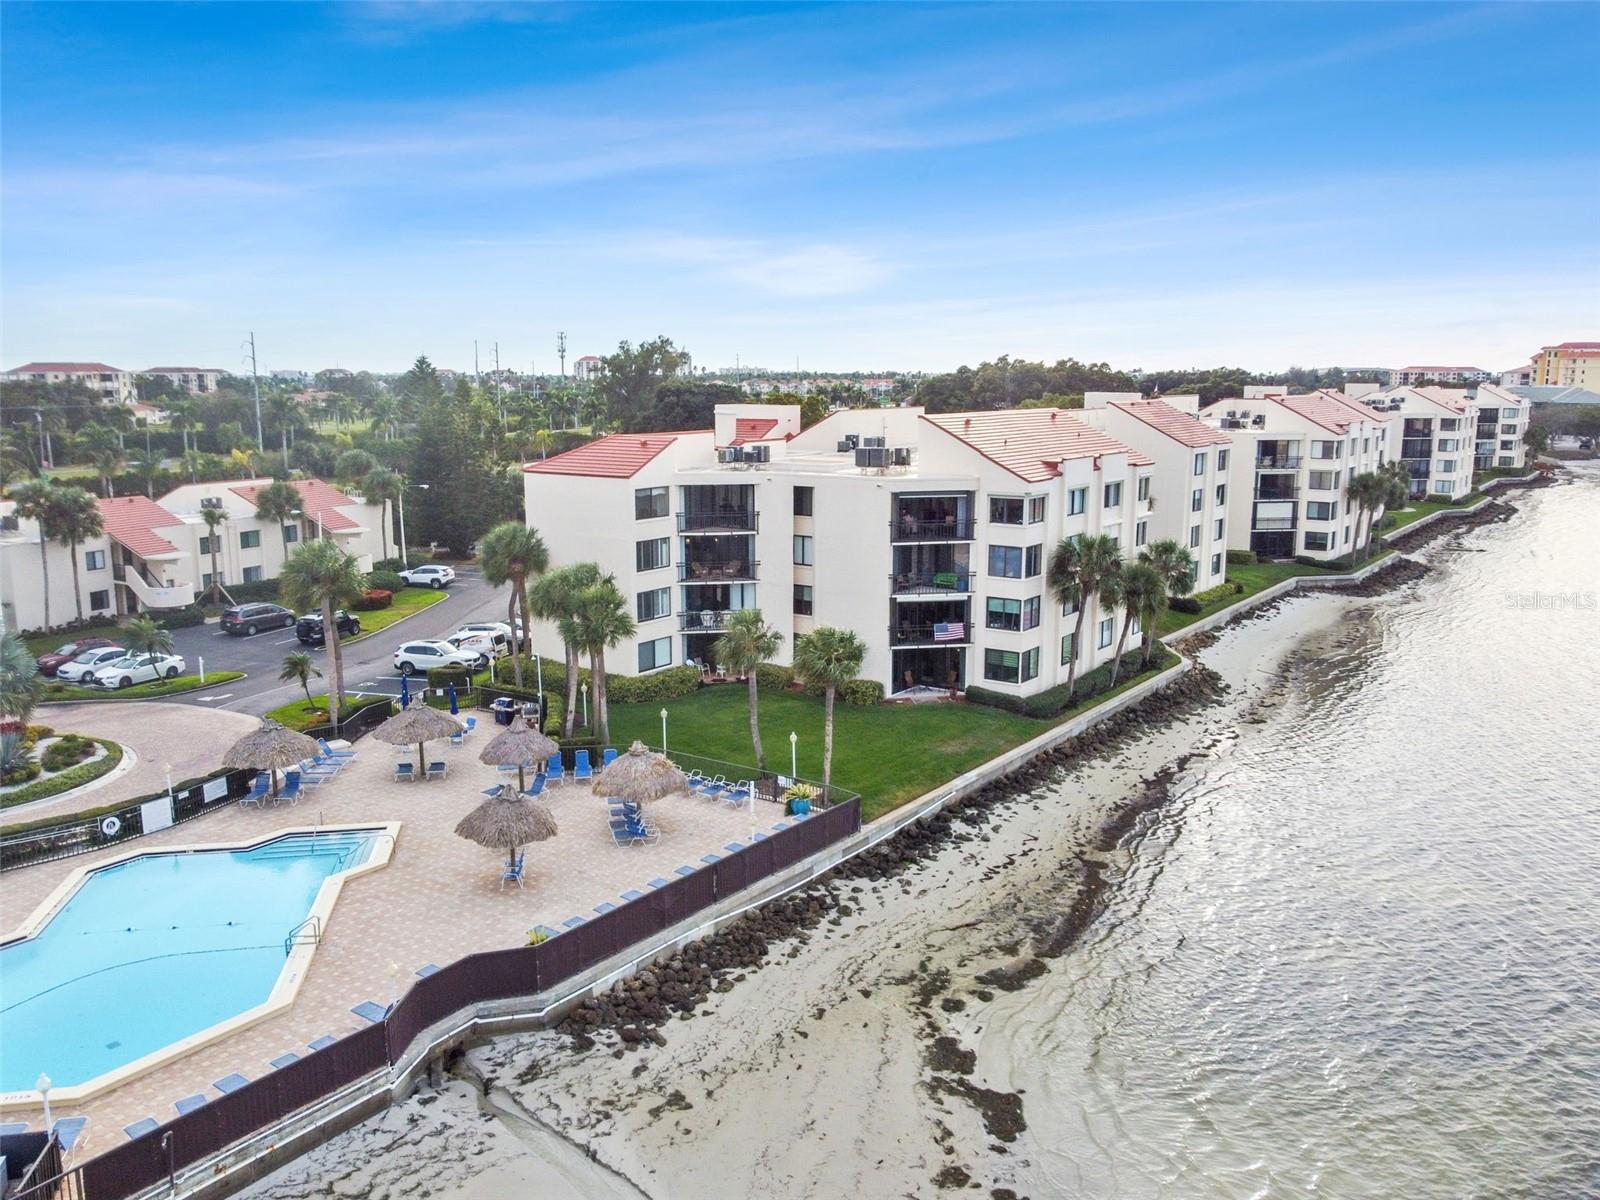 Isla del Sol golf course is right outside your home